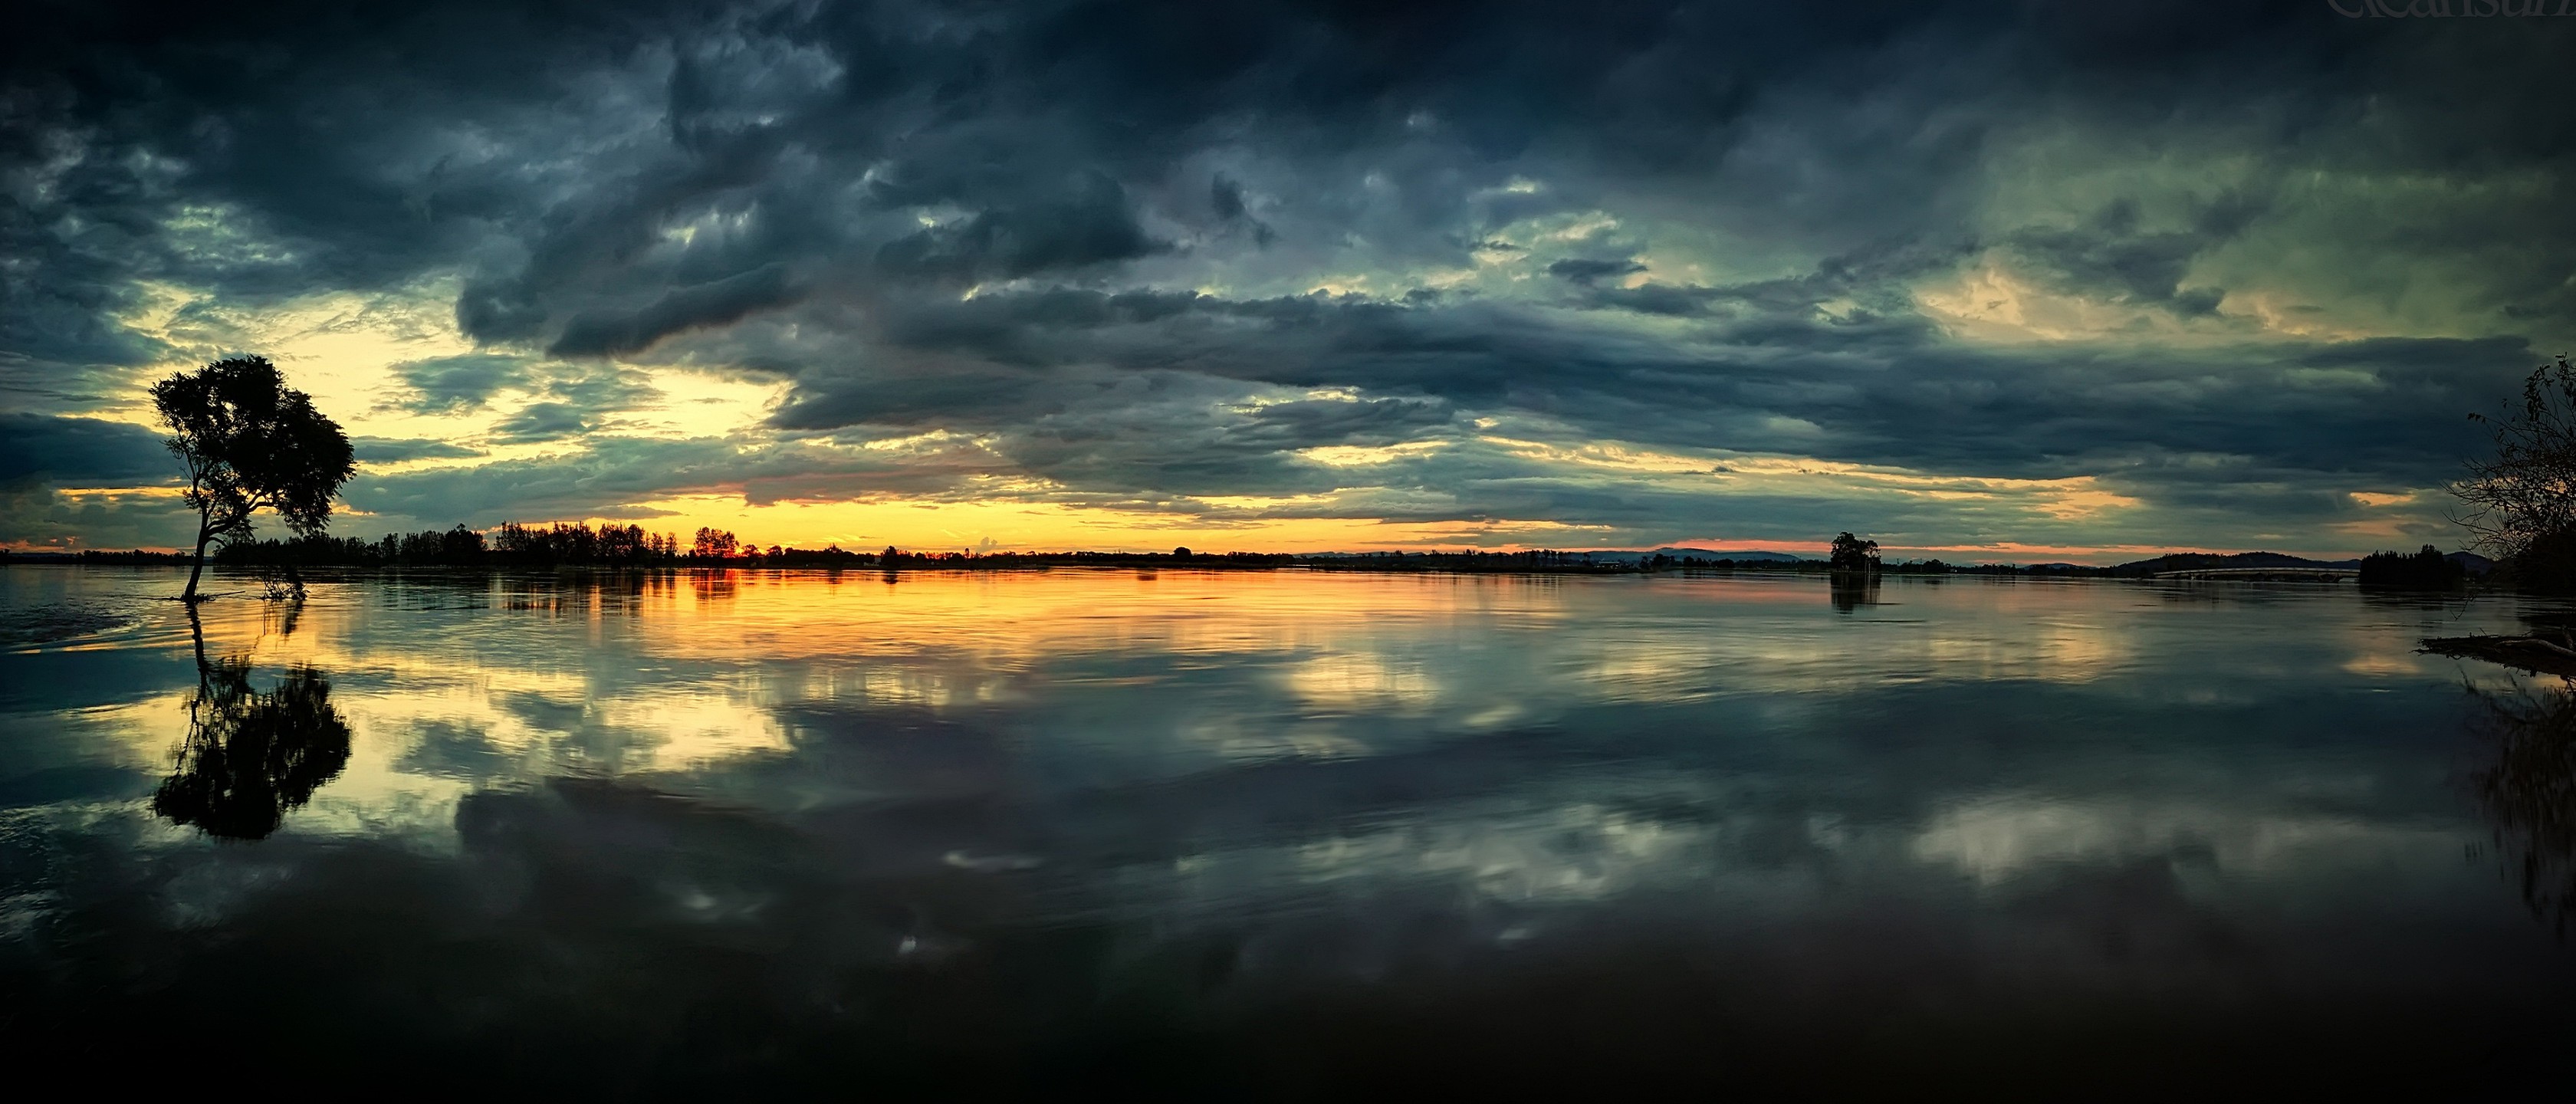 General 3360x1440 nature reflection clouds water trees landscape dark sky